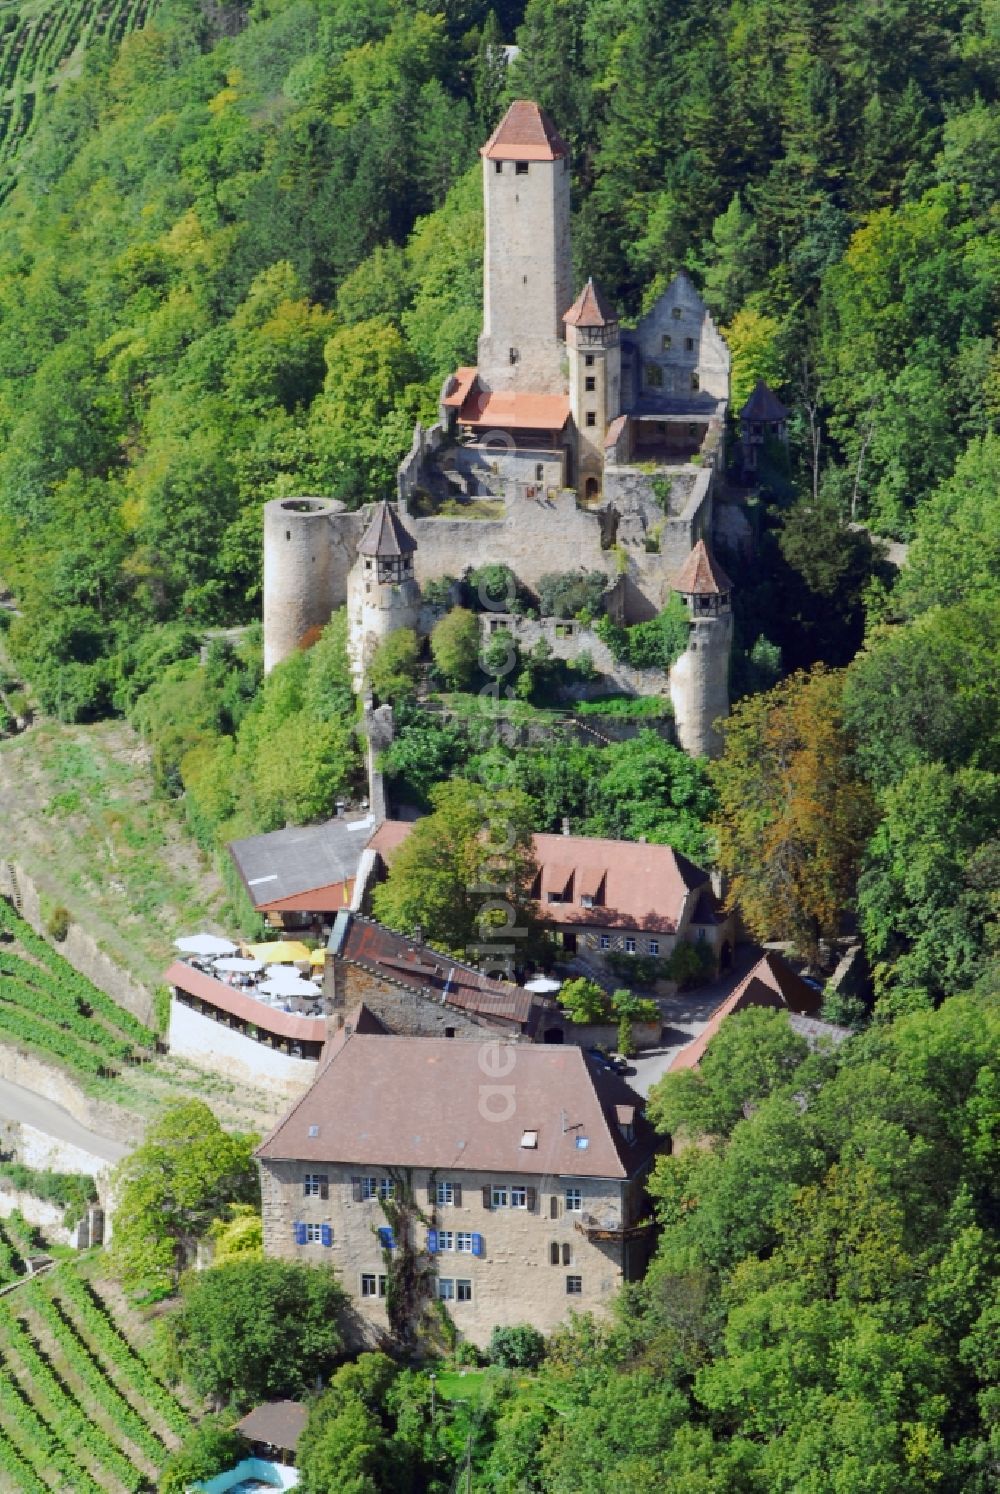 Neckarzimmern from the bird's eye view: Ruins and vestiges of the former castle and fortress Burg Hornberg in Neckarzimmern in the state Baden-Wuerttemberg, Germany